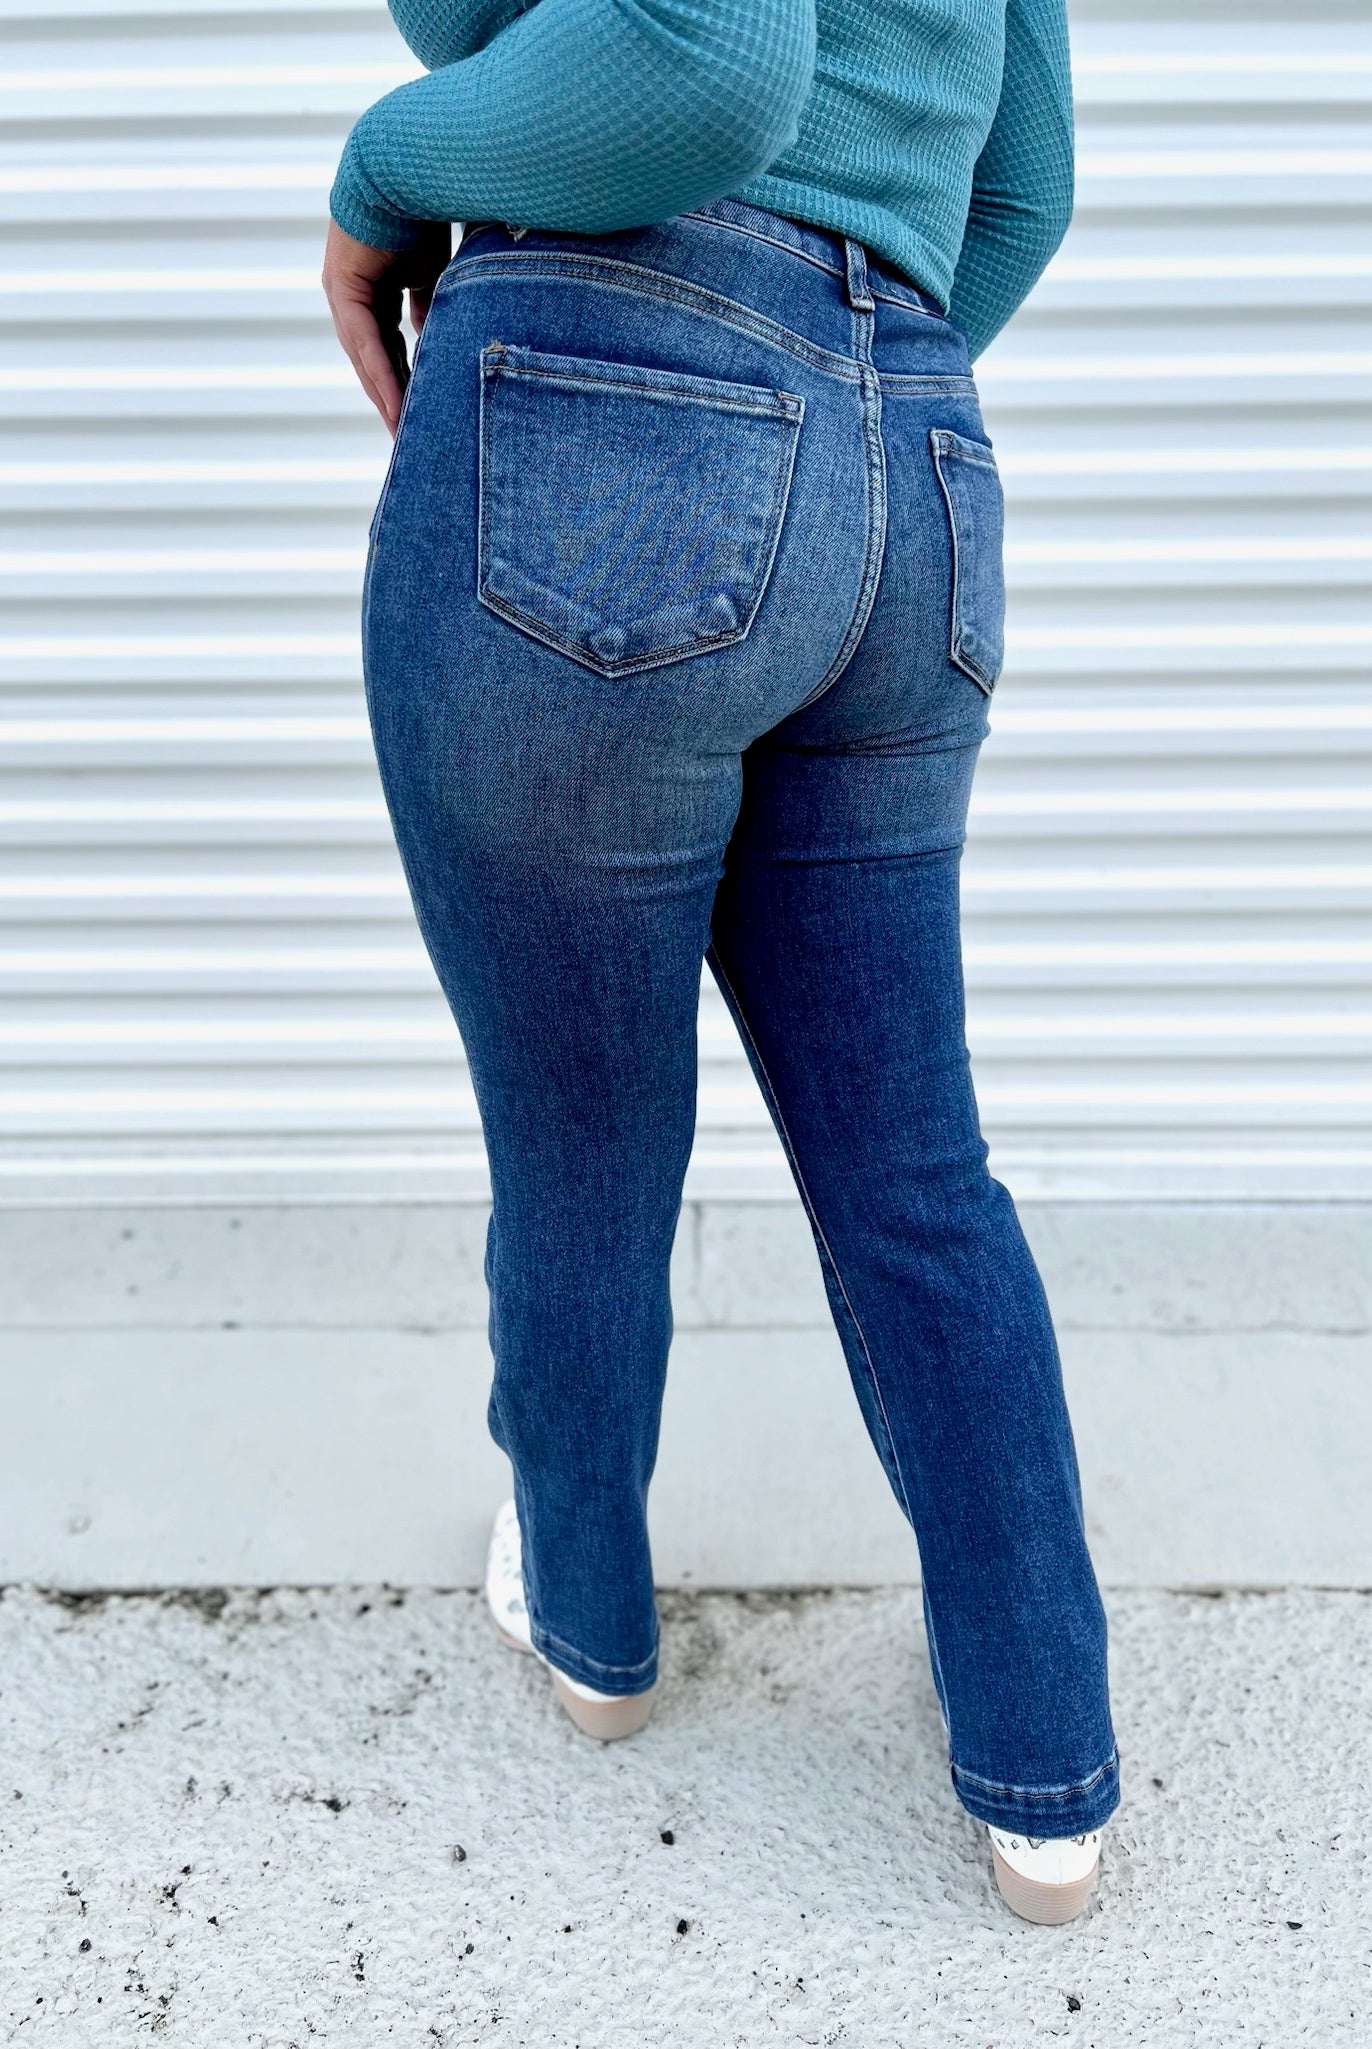 Take on the Day Straight Leg by Risen-190 Jeans-Risen Jeans-Heathered Boho Boutique, Women's Fashion and Accessories in Palmetto, FL